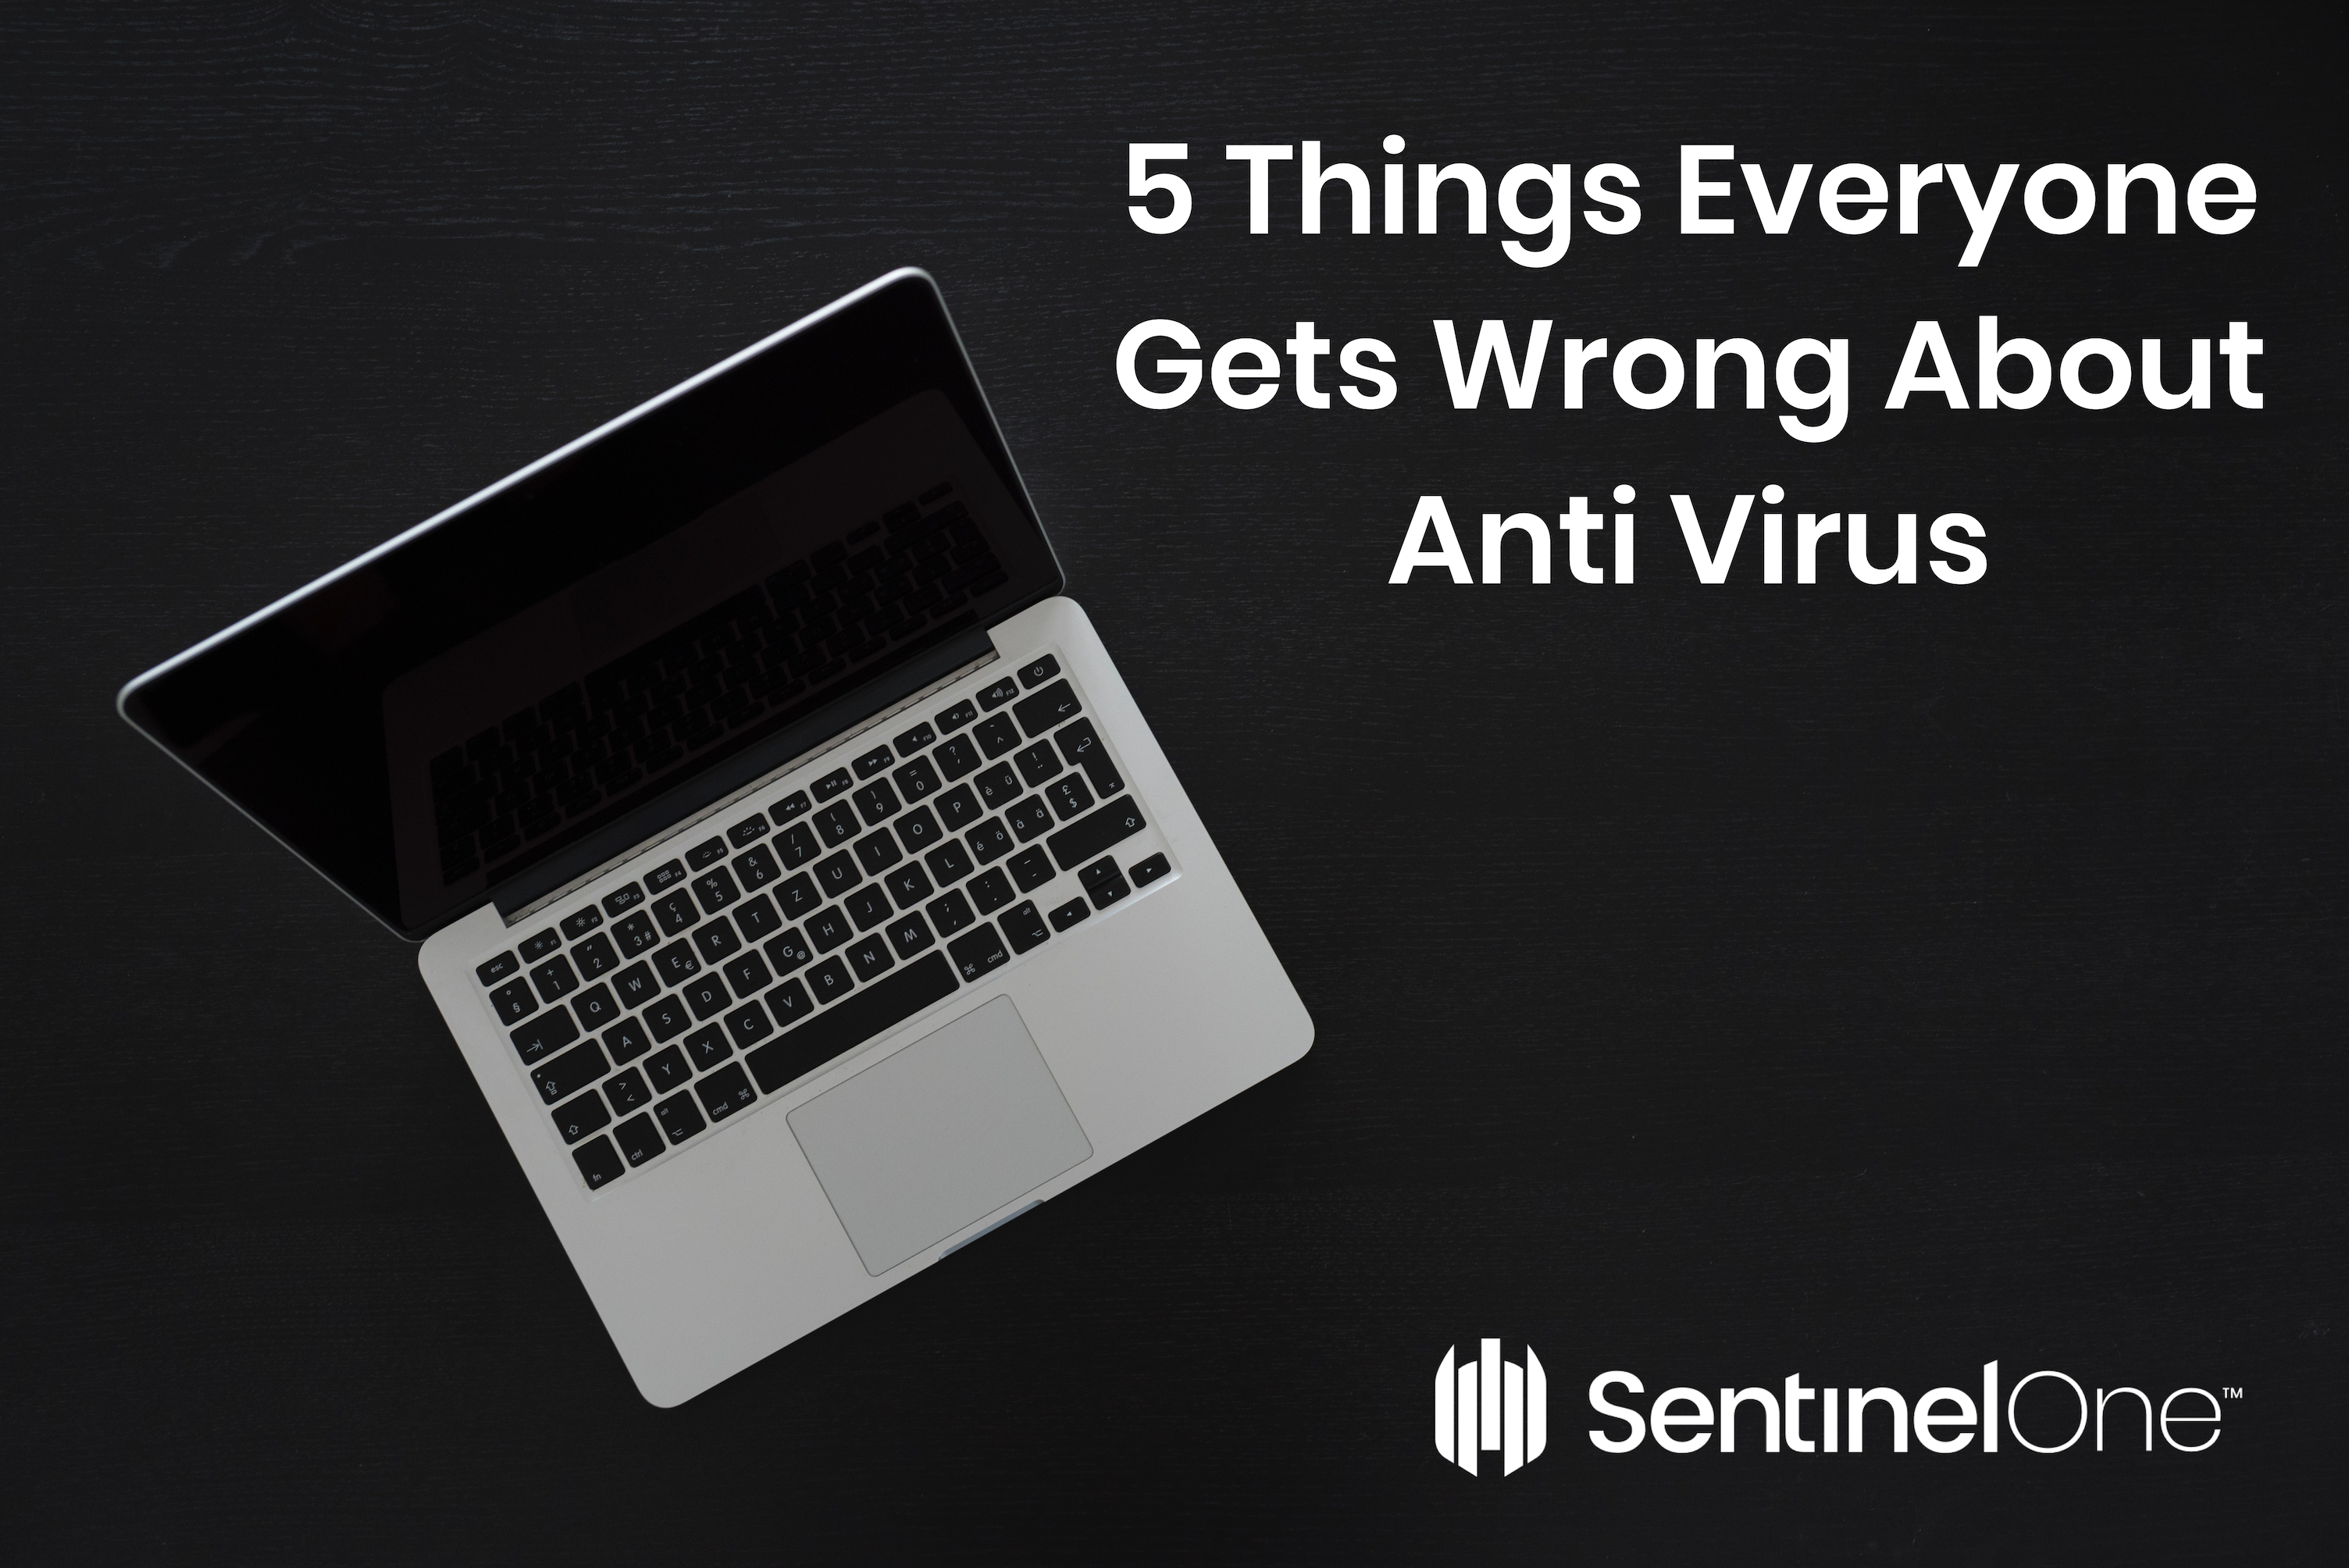 SentinelOne's opened laptop with 5 things everyone gets wrong about anti virus displaying.